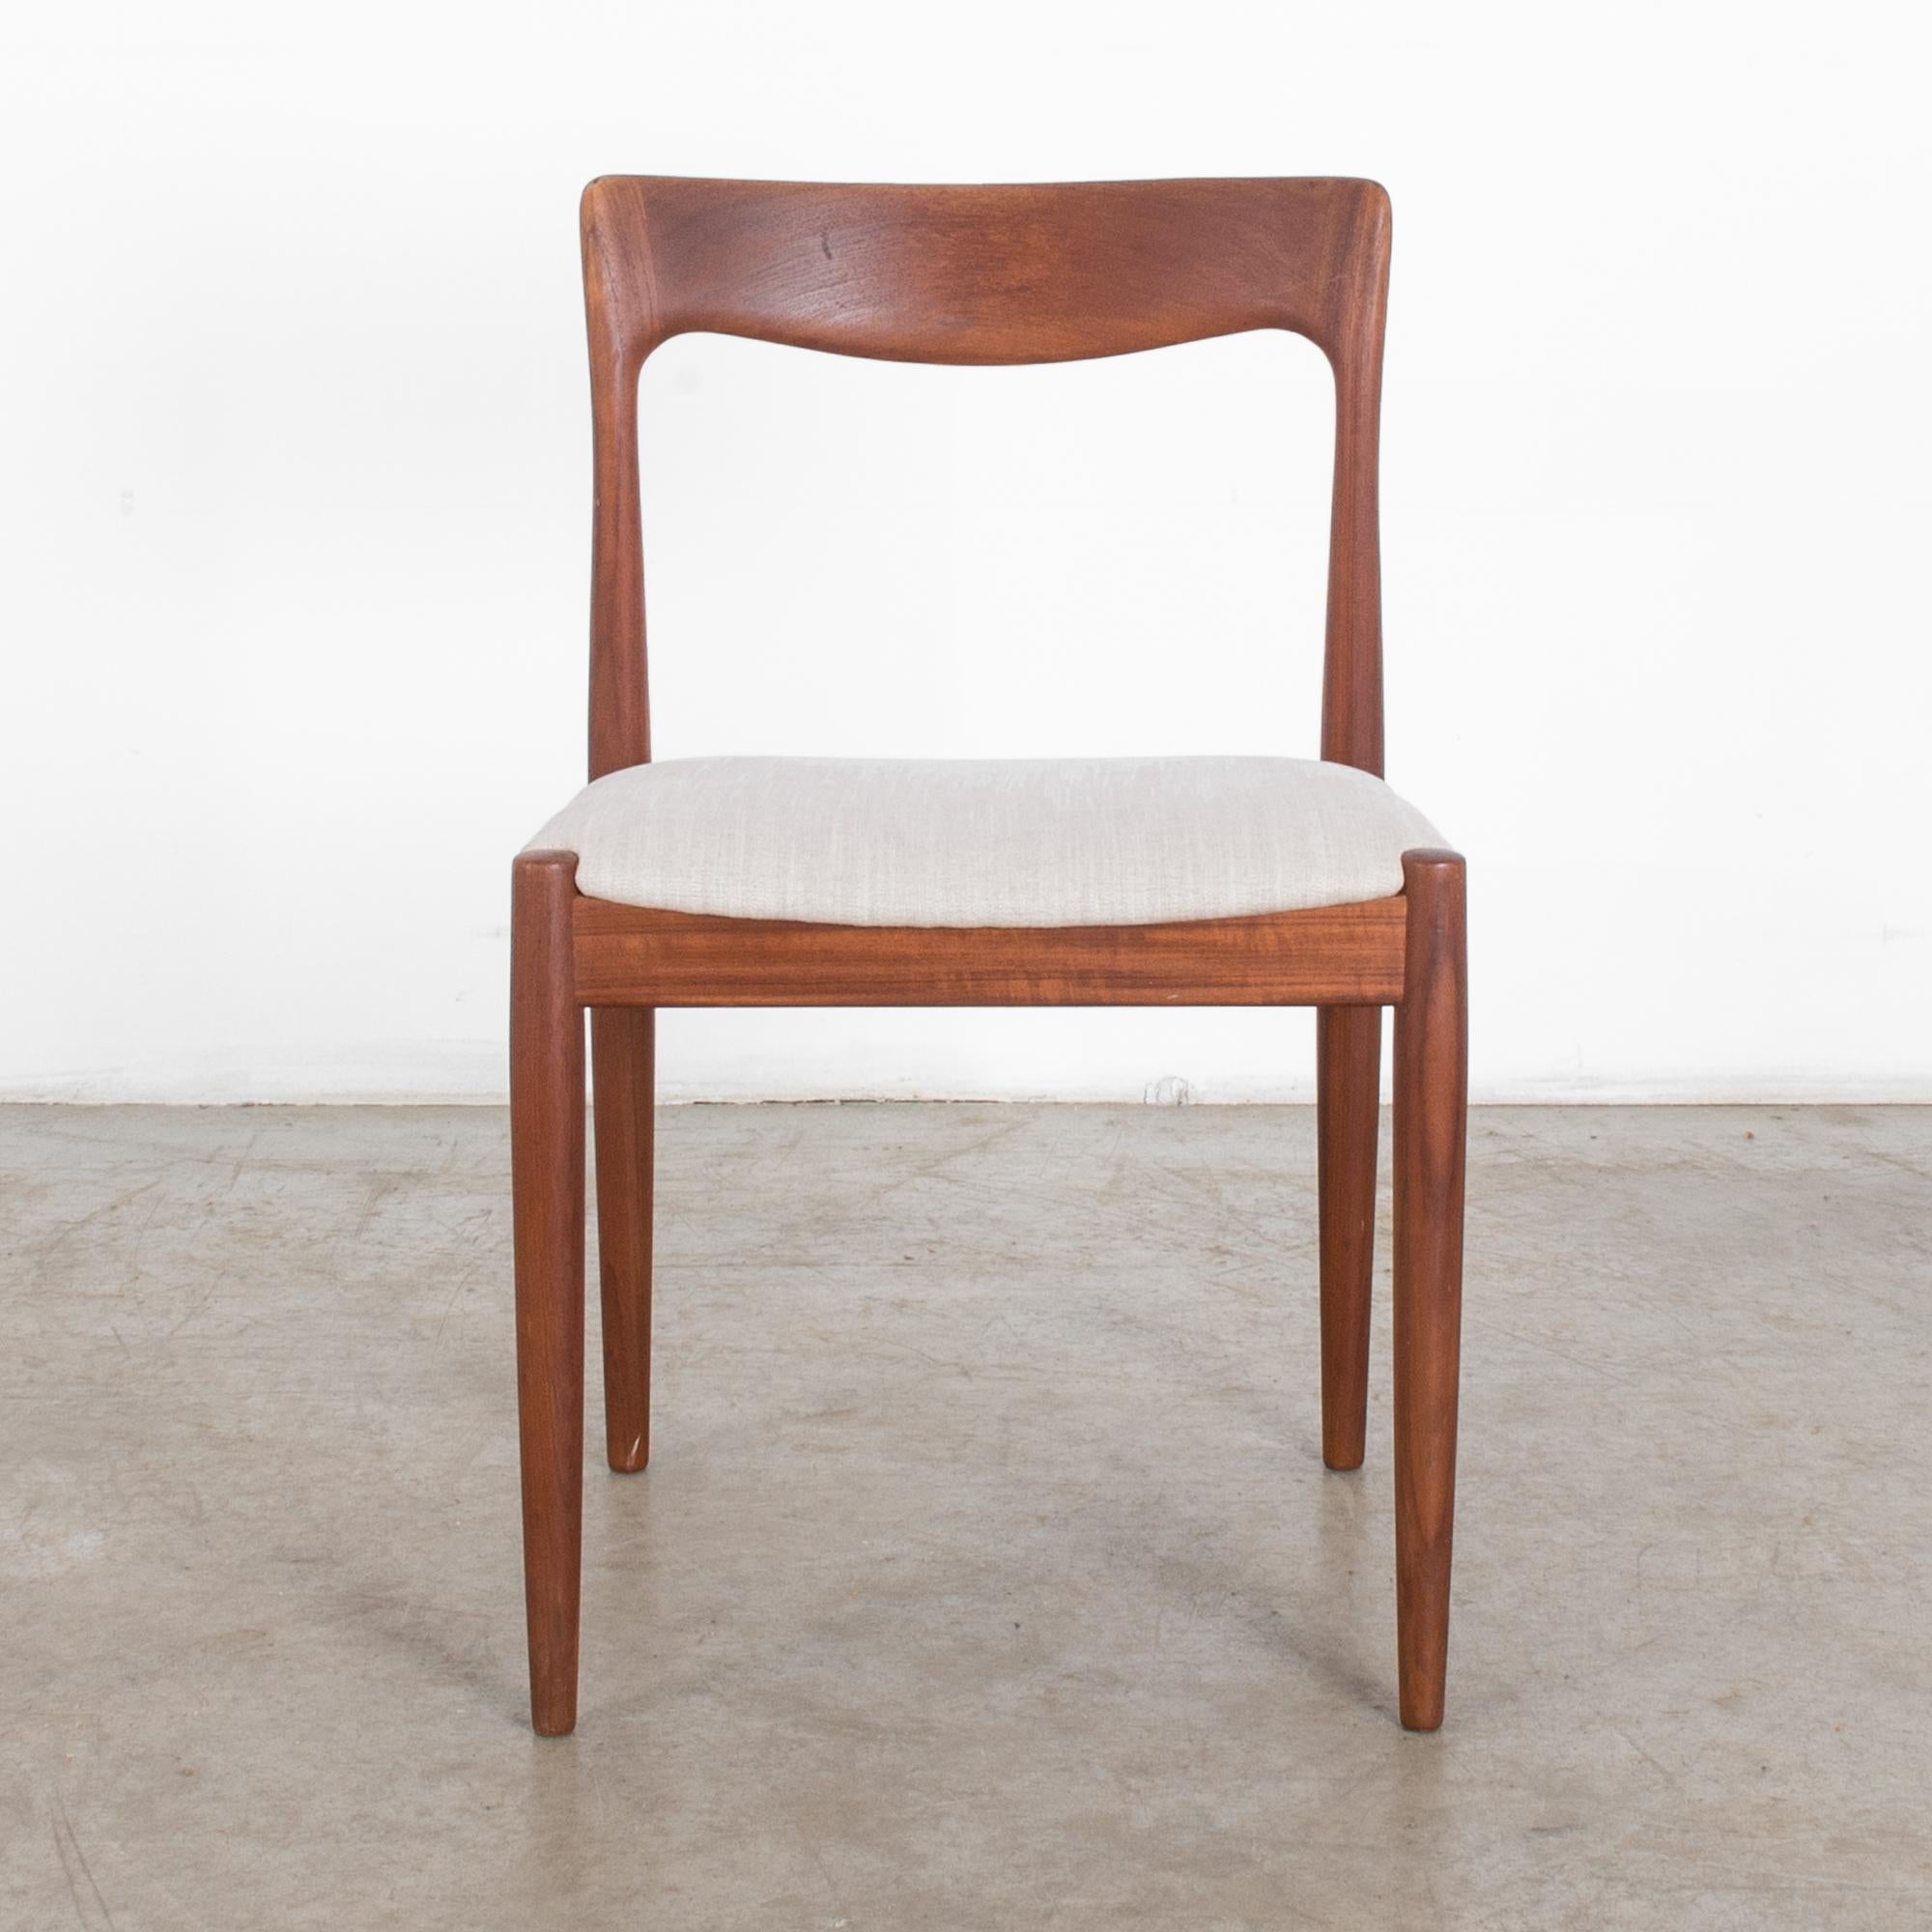 A 1960s teak chair by Danish furniture designer Neils O. Møller. A modernist design with tapered legs and fluid, expressive back piece. A cushioned seat is upholstered in a natural white. The warm, rosy tones of the teak emphasize the sophistication